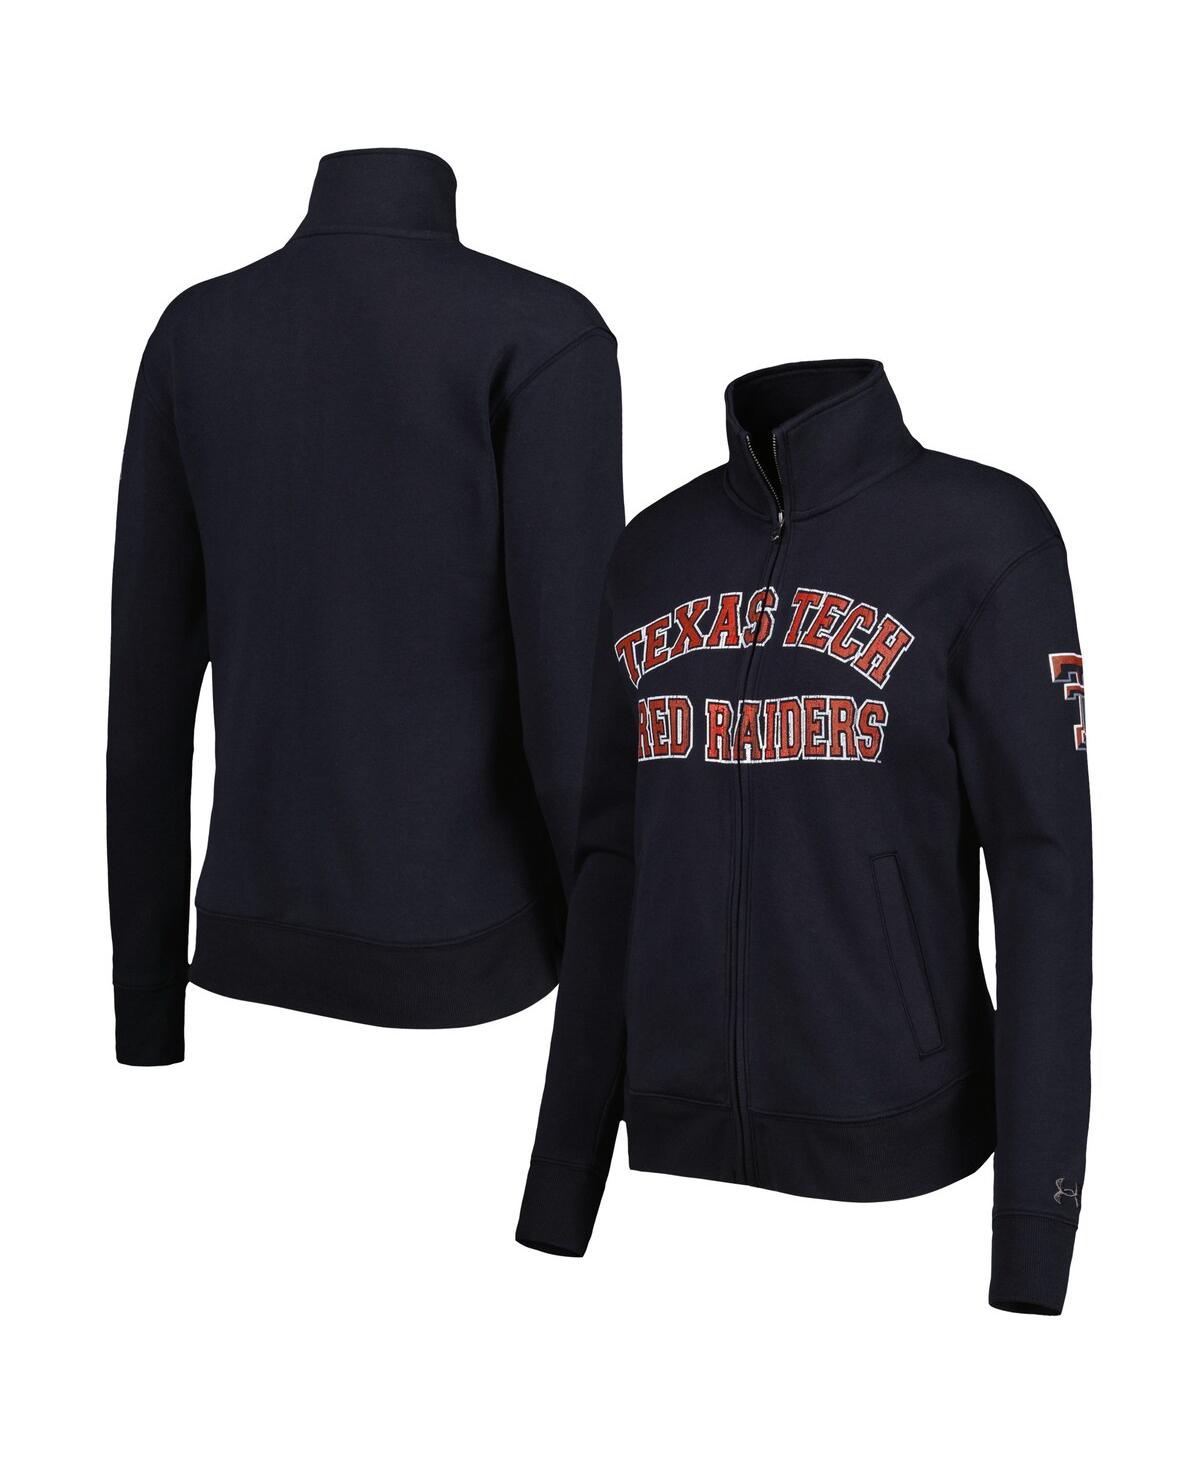 Shop Under Armour Women's  Black Texas Tech Red Raiders All Day Full-zip Jacket